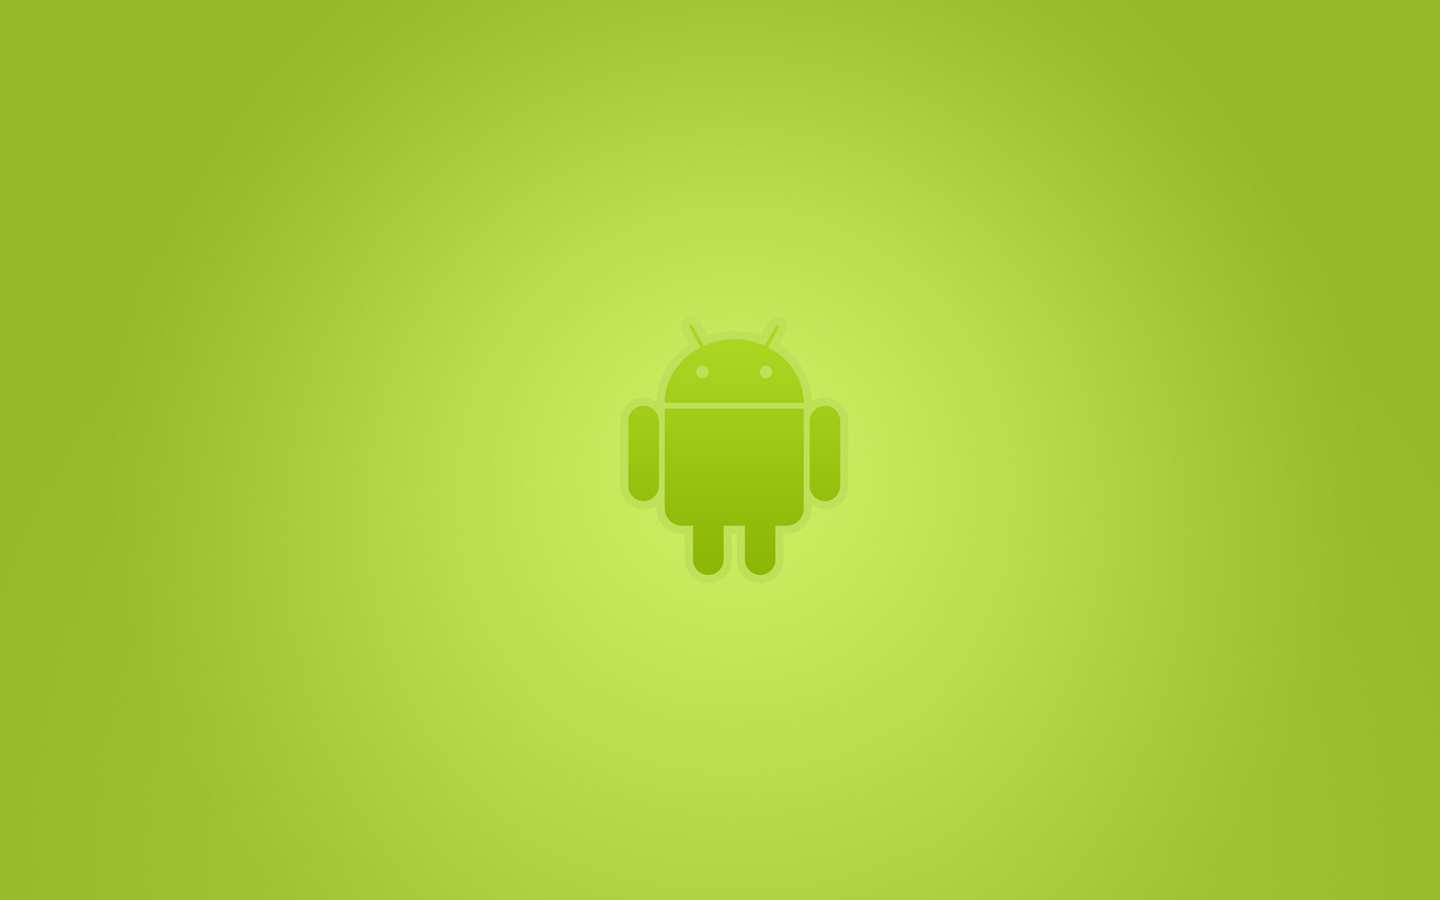 Android 7 inch tablet wallpaper size 1440x900